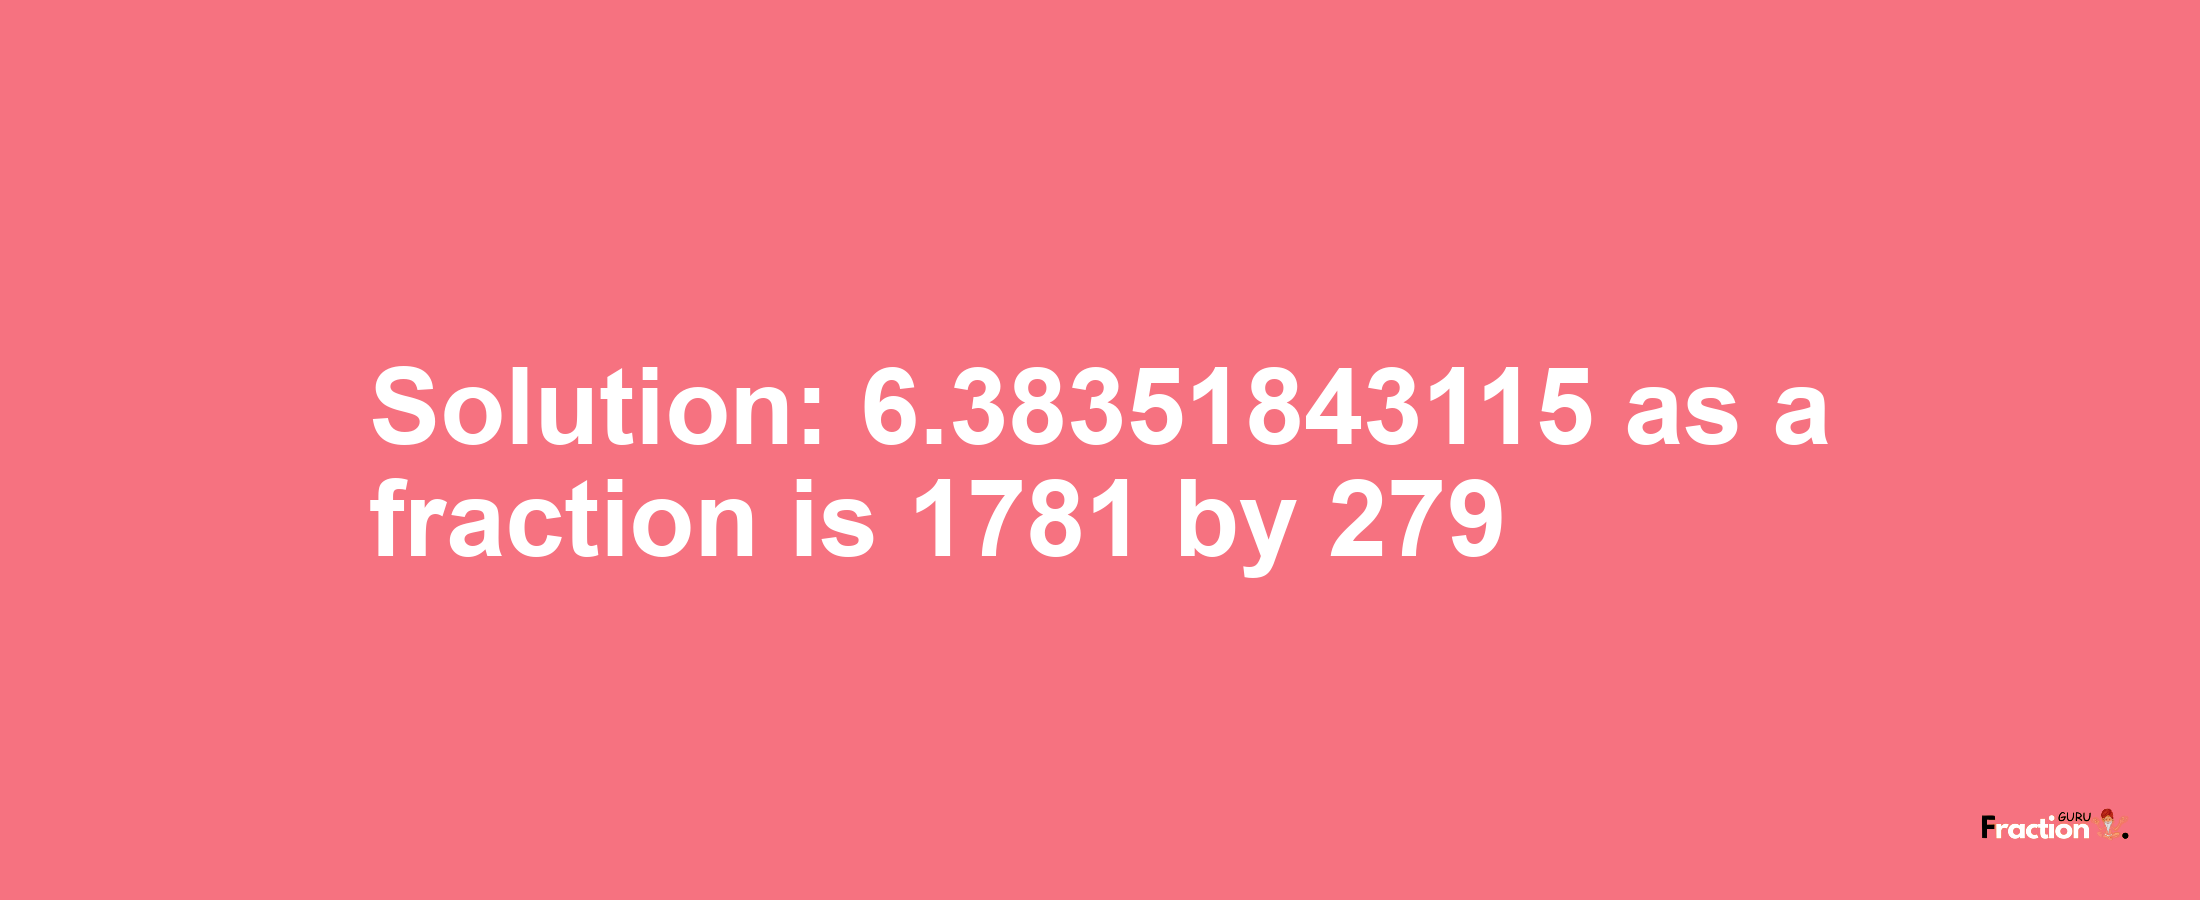 Solution:6.38351843115 as a fraction is 1781/279